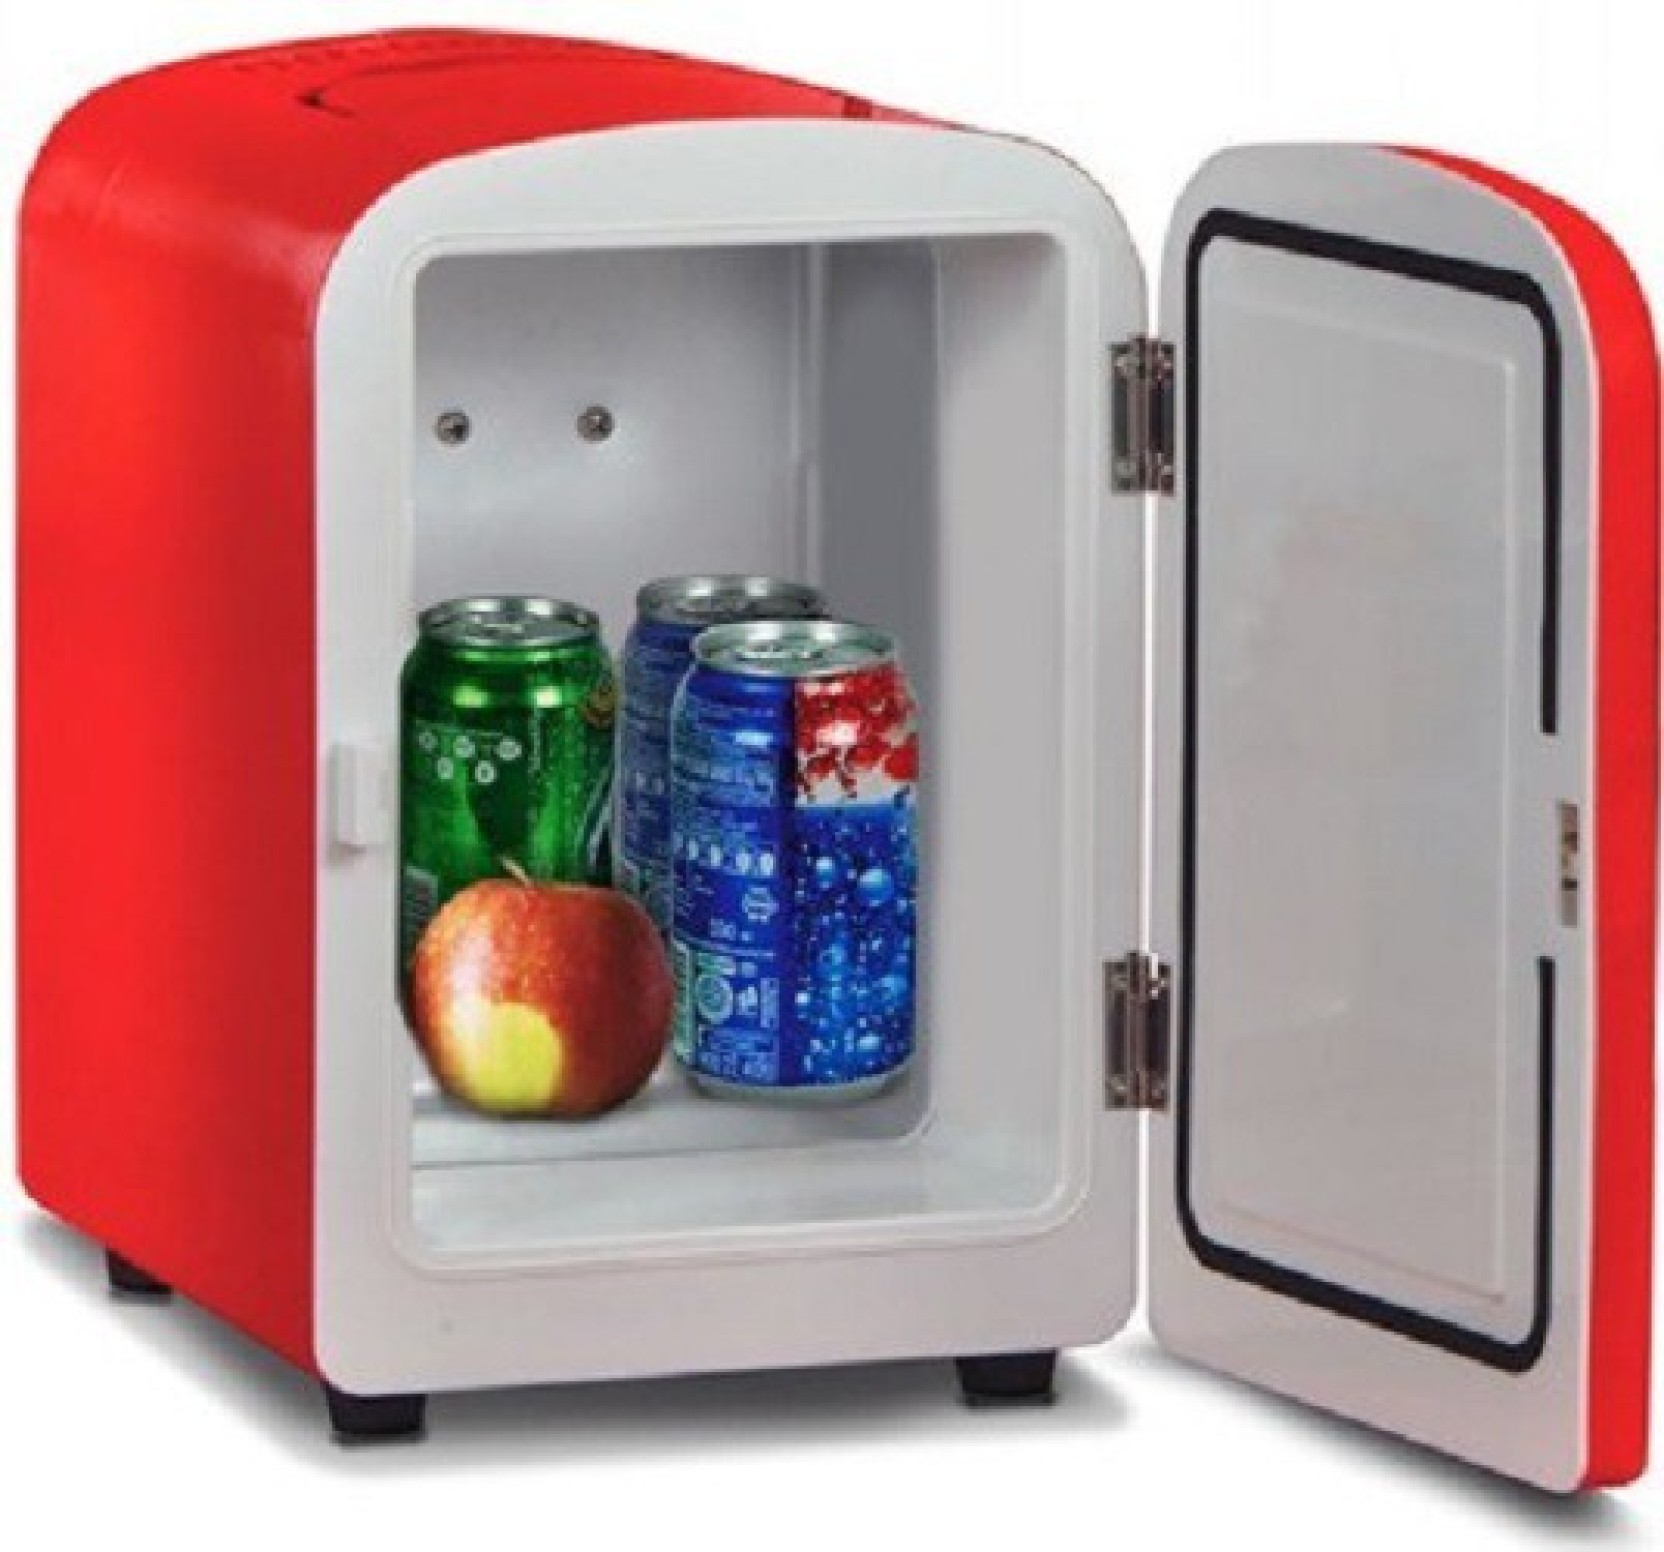 Vox Mini Fridge Thermoelectric portable Cooler and Warmer 4 L Car ...